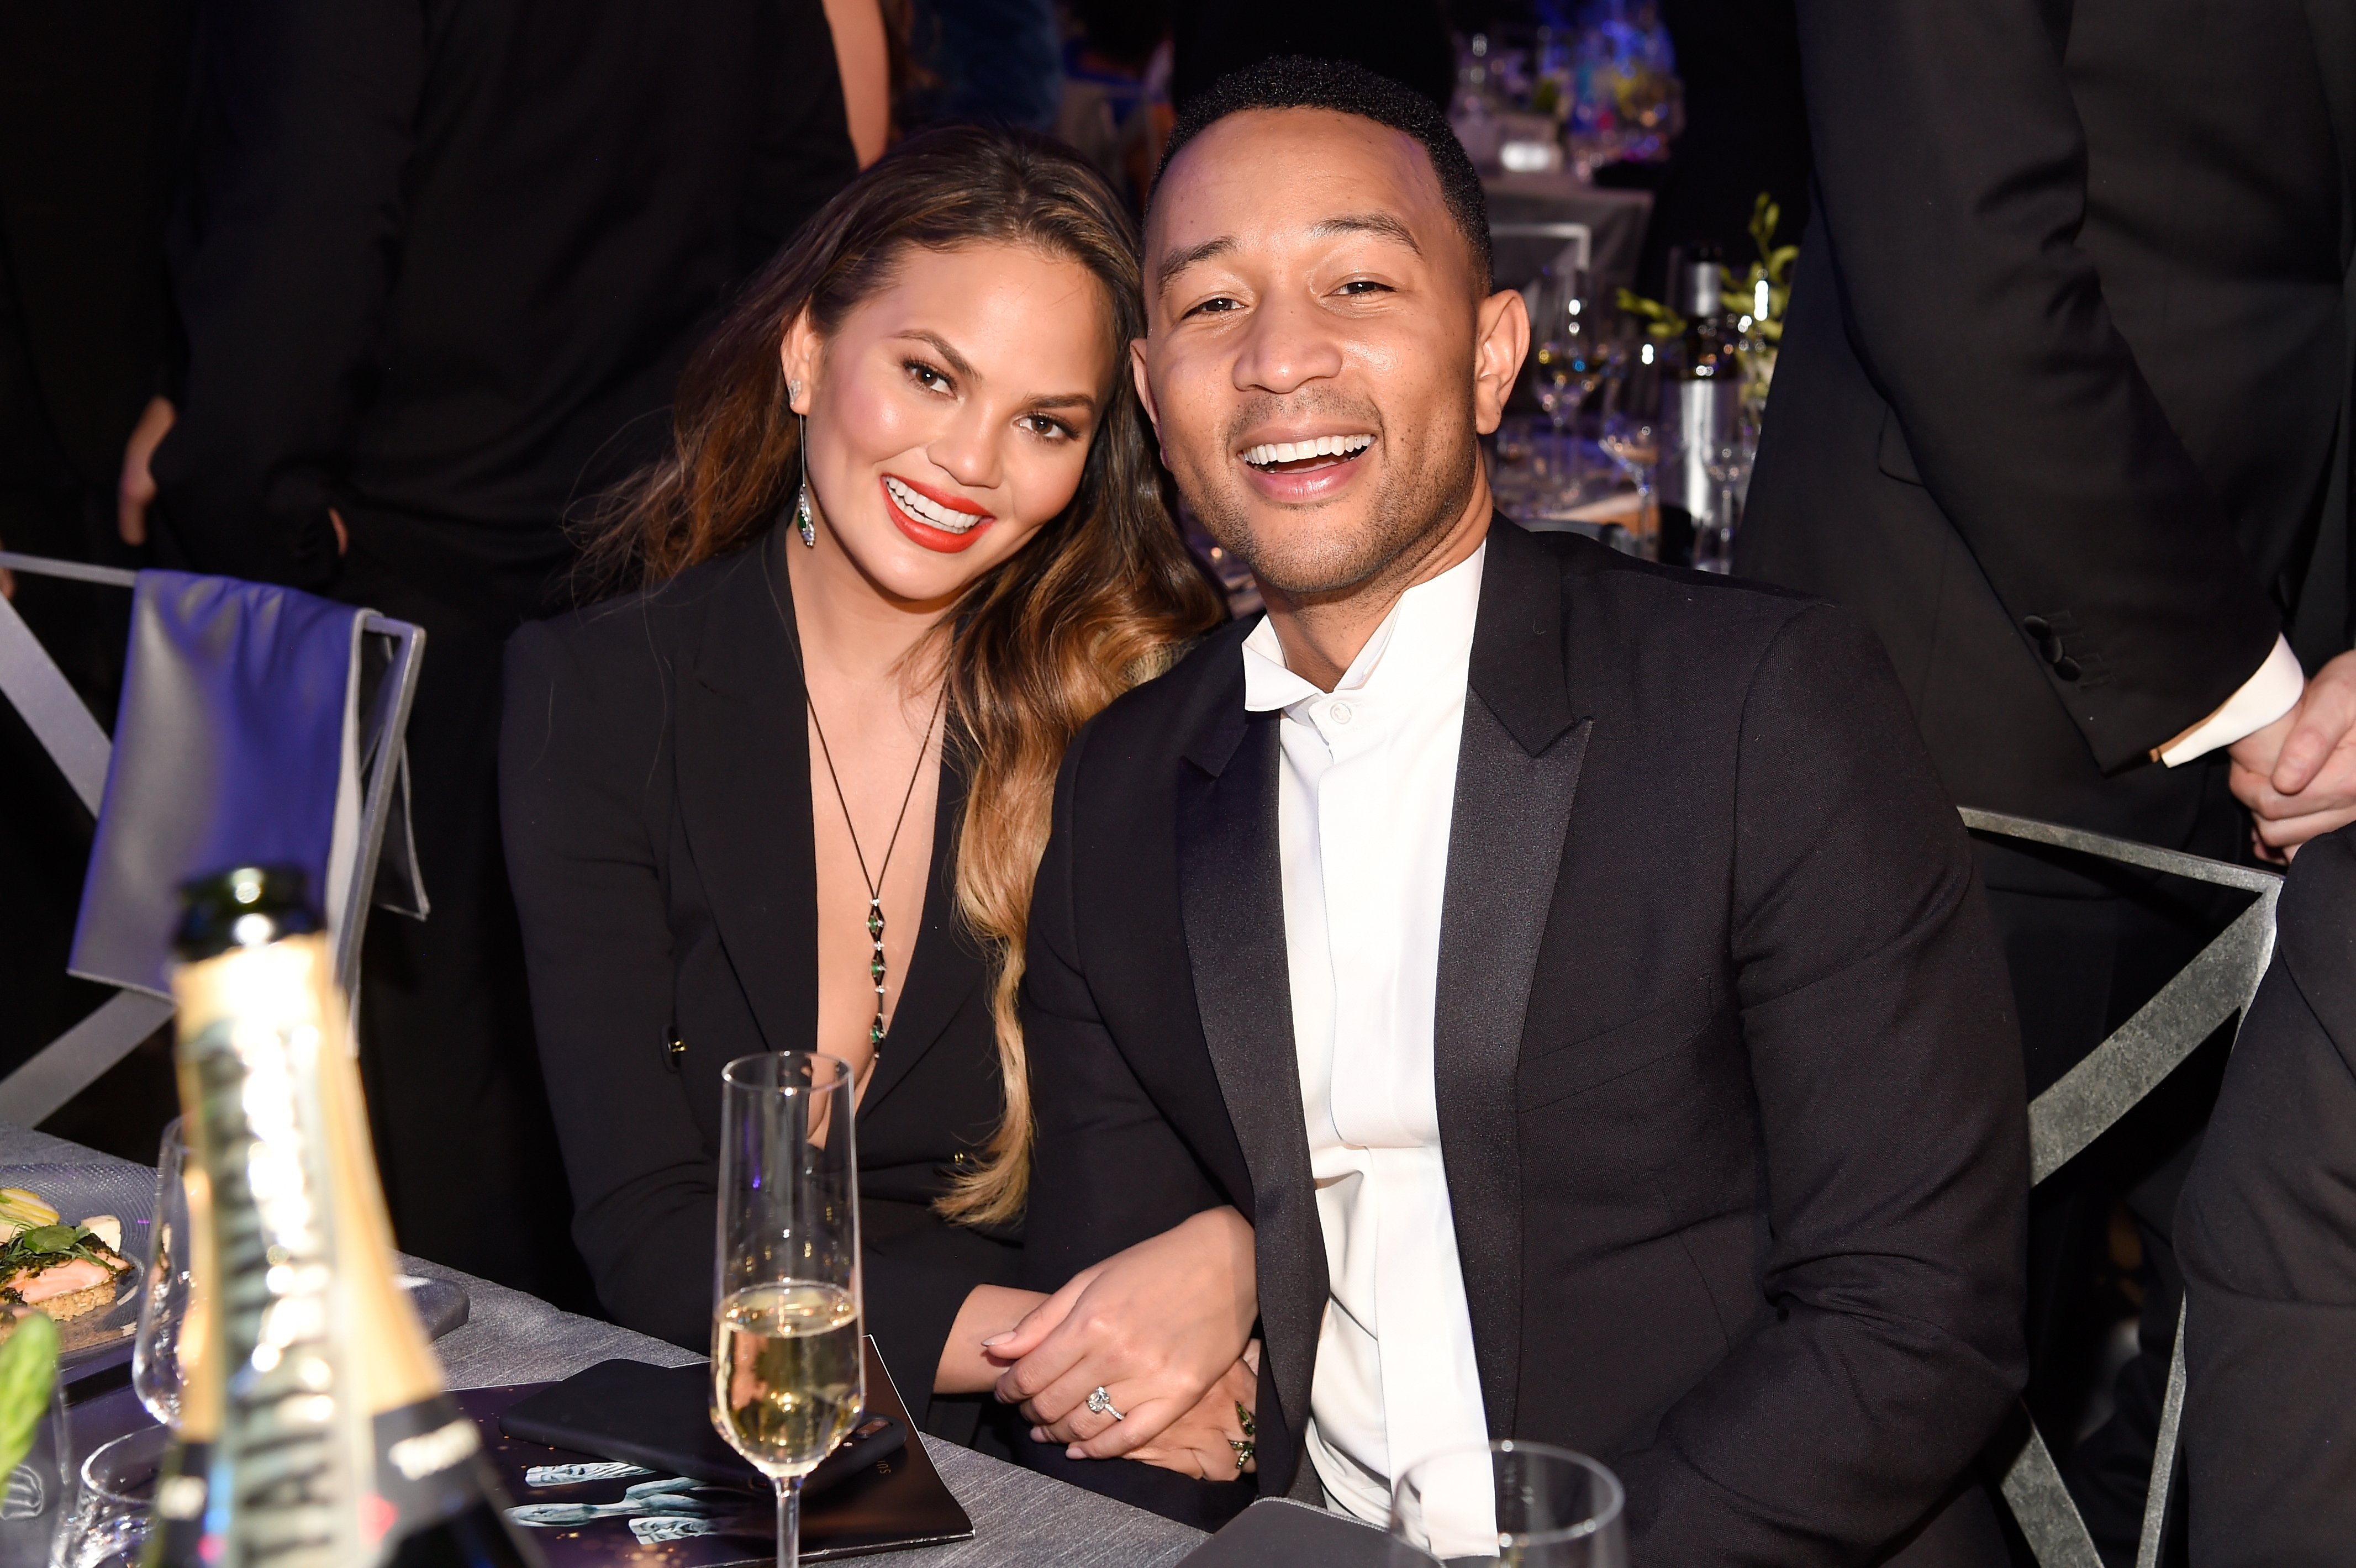 Chrissy Teigen and John Legend during The 23rd Annual Screen Actors Guild Awards  on January 29, 2017 in Los Angeles, California. | Source: Getty Images